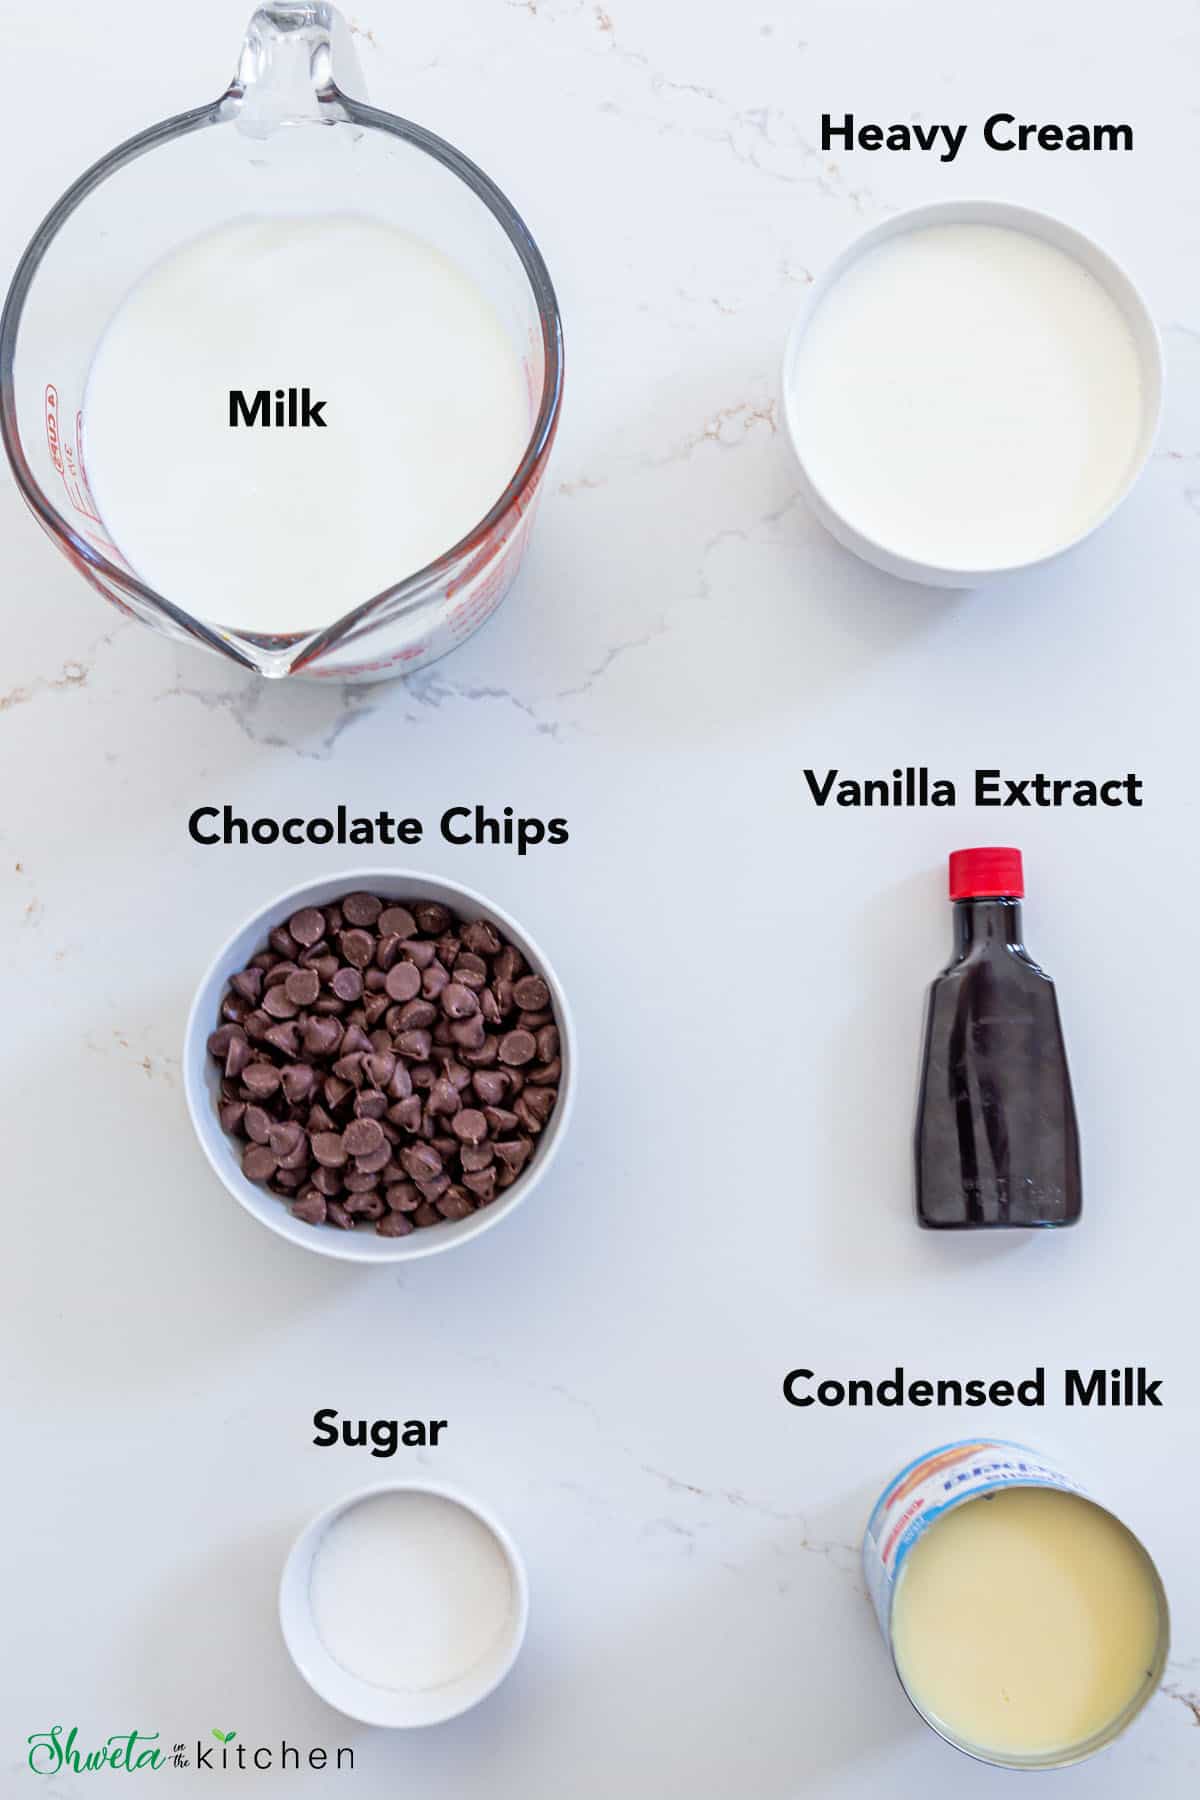 Hot Chocolate ingredients on a white surface